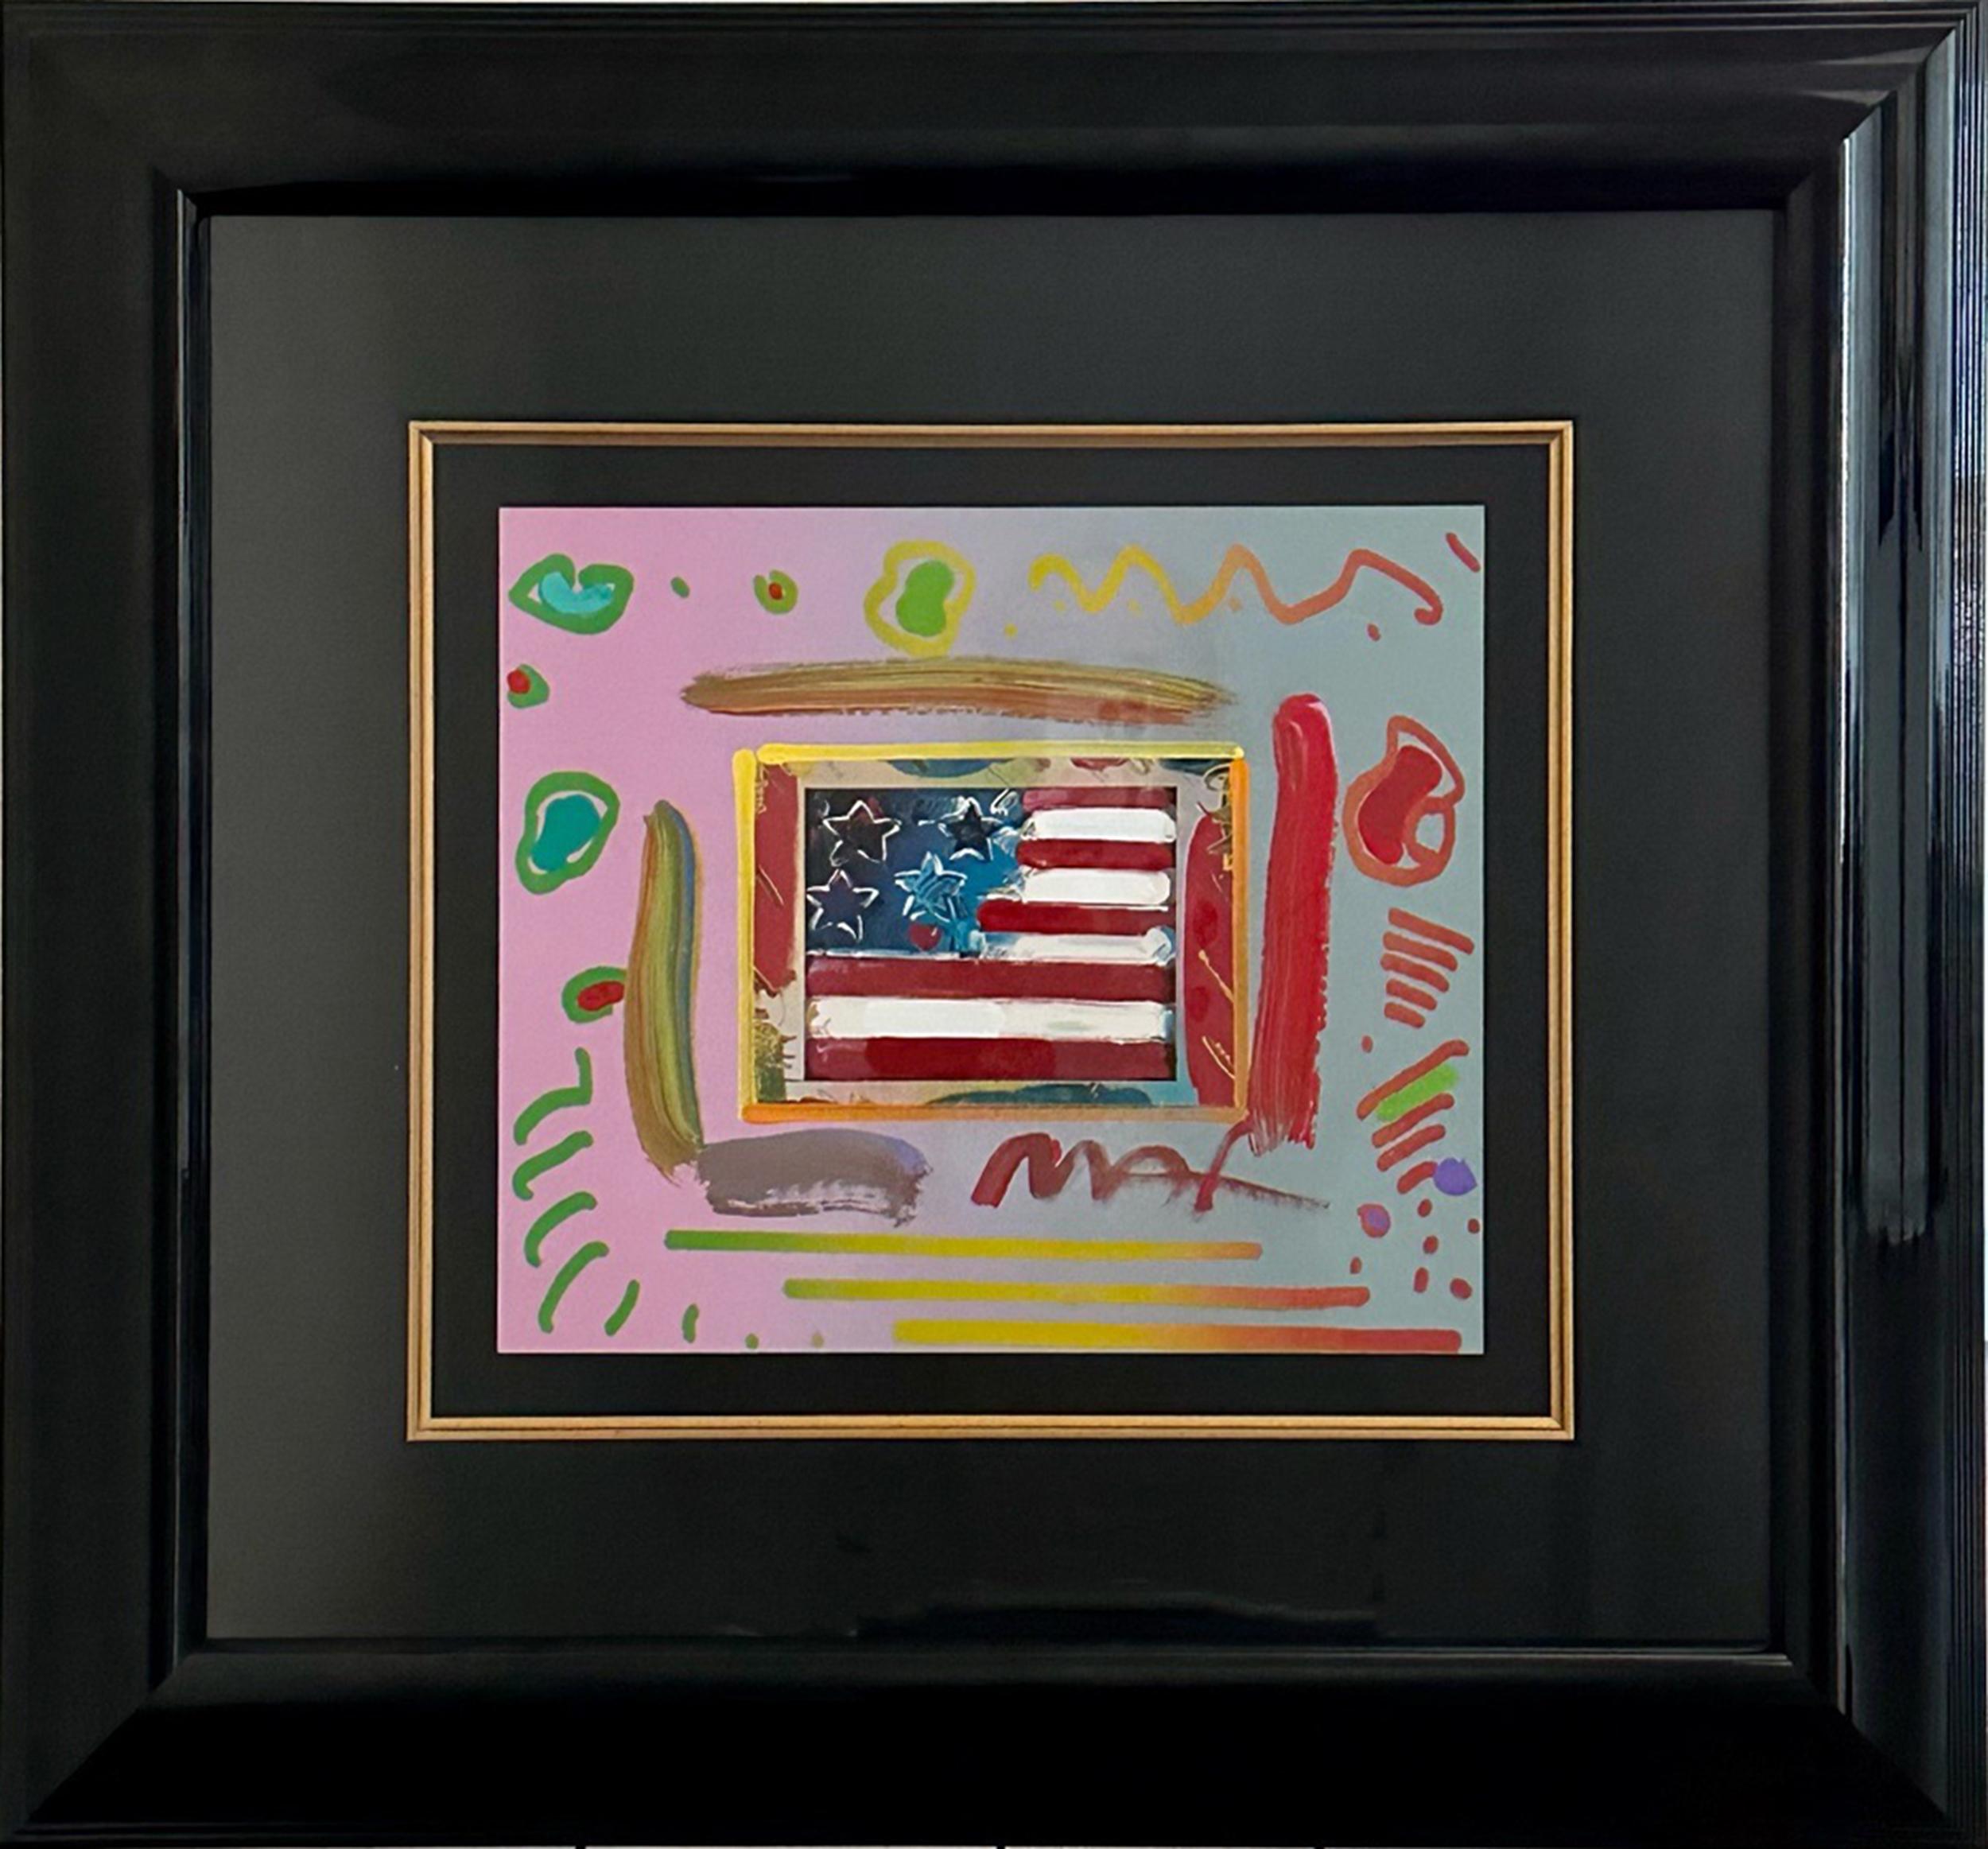 A simply framed example of Peter Max’s American flag paintings, one of his most used motifs other than the Statue of Liberty. The simplified flag bears only 4 stars plus a small heart in the upper left. The rest of the flag consists of 5 red stripes